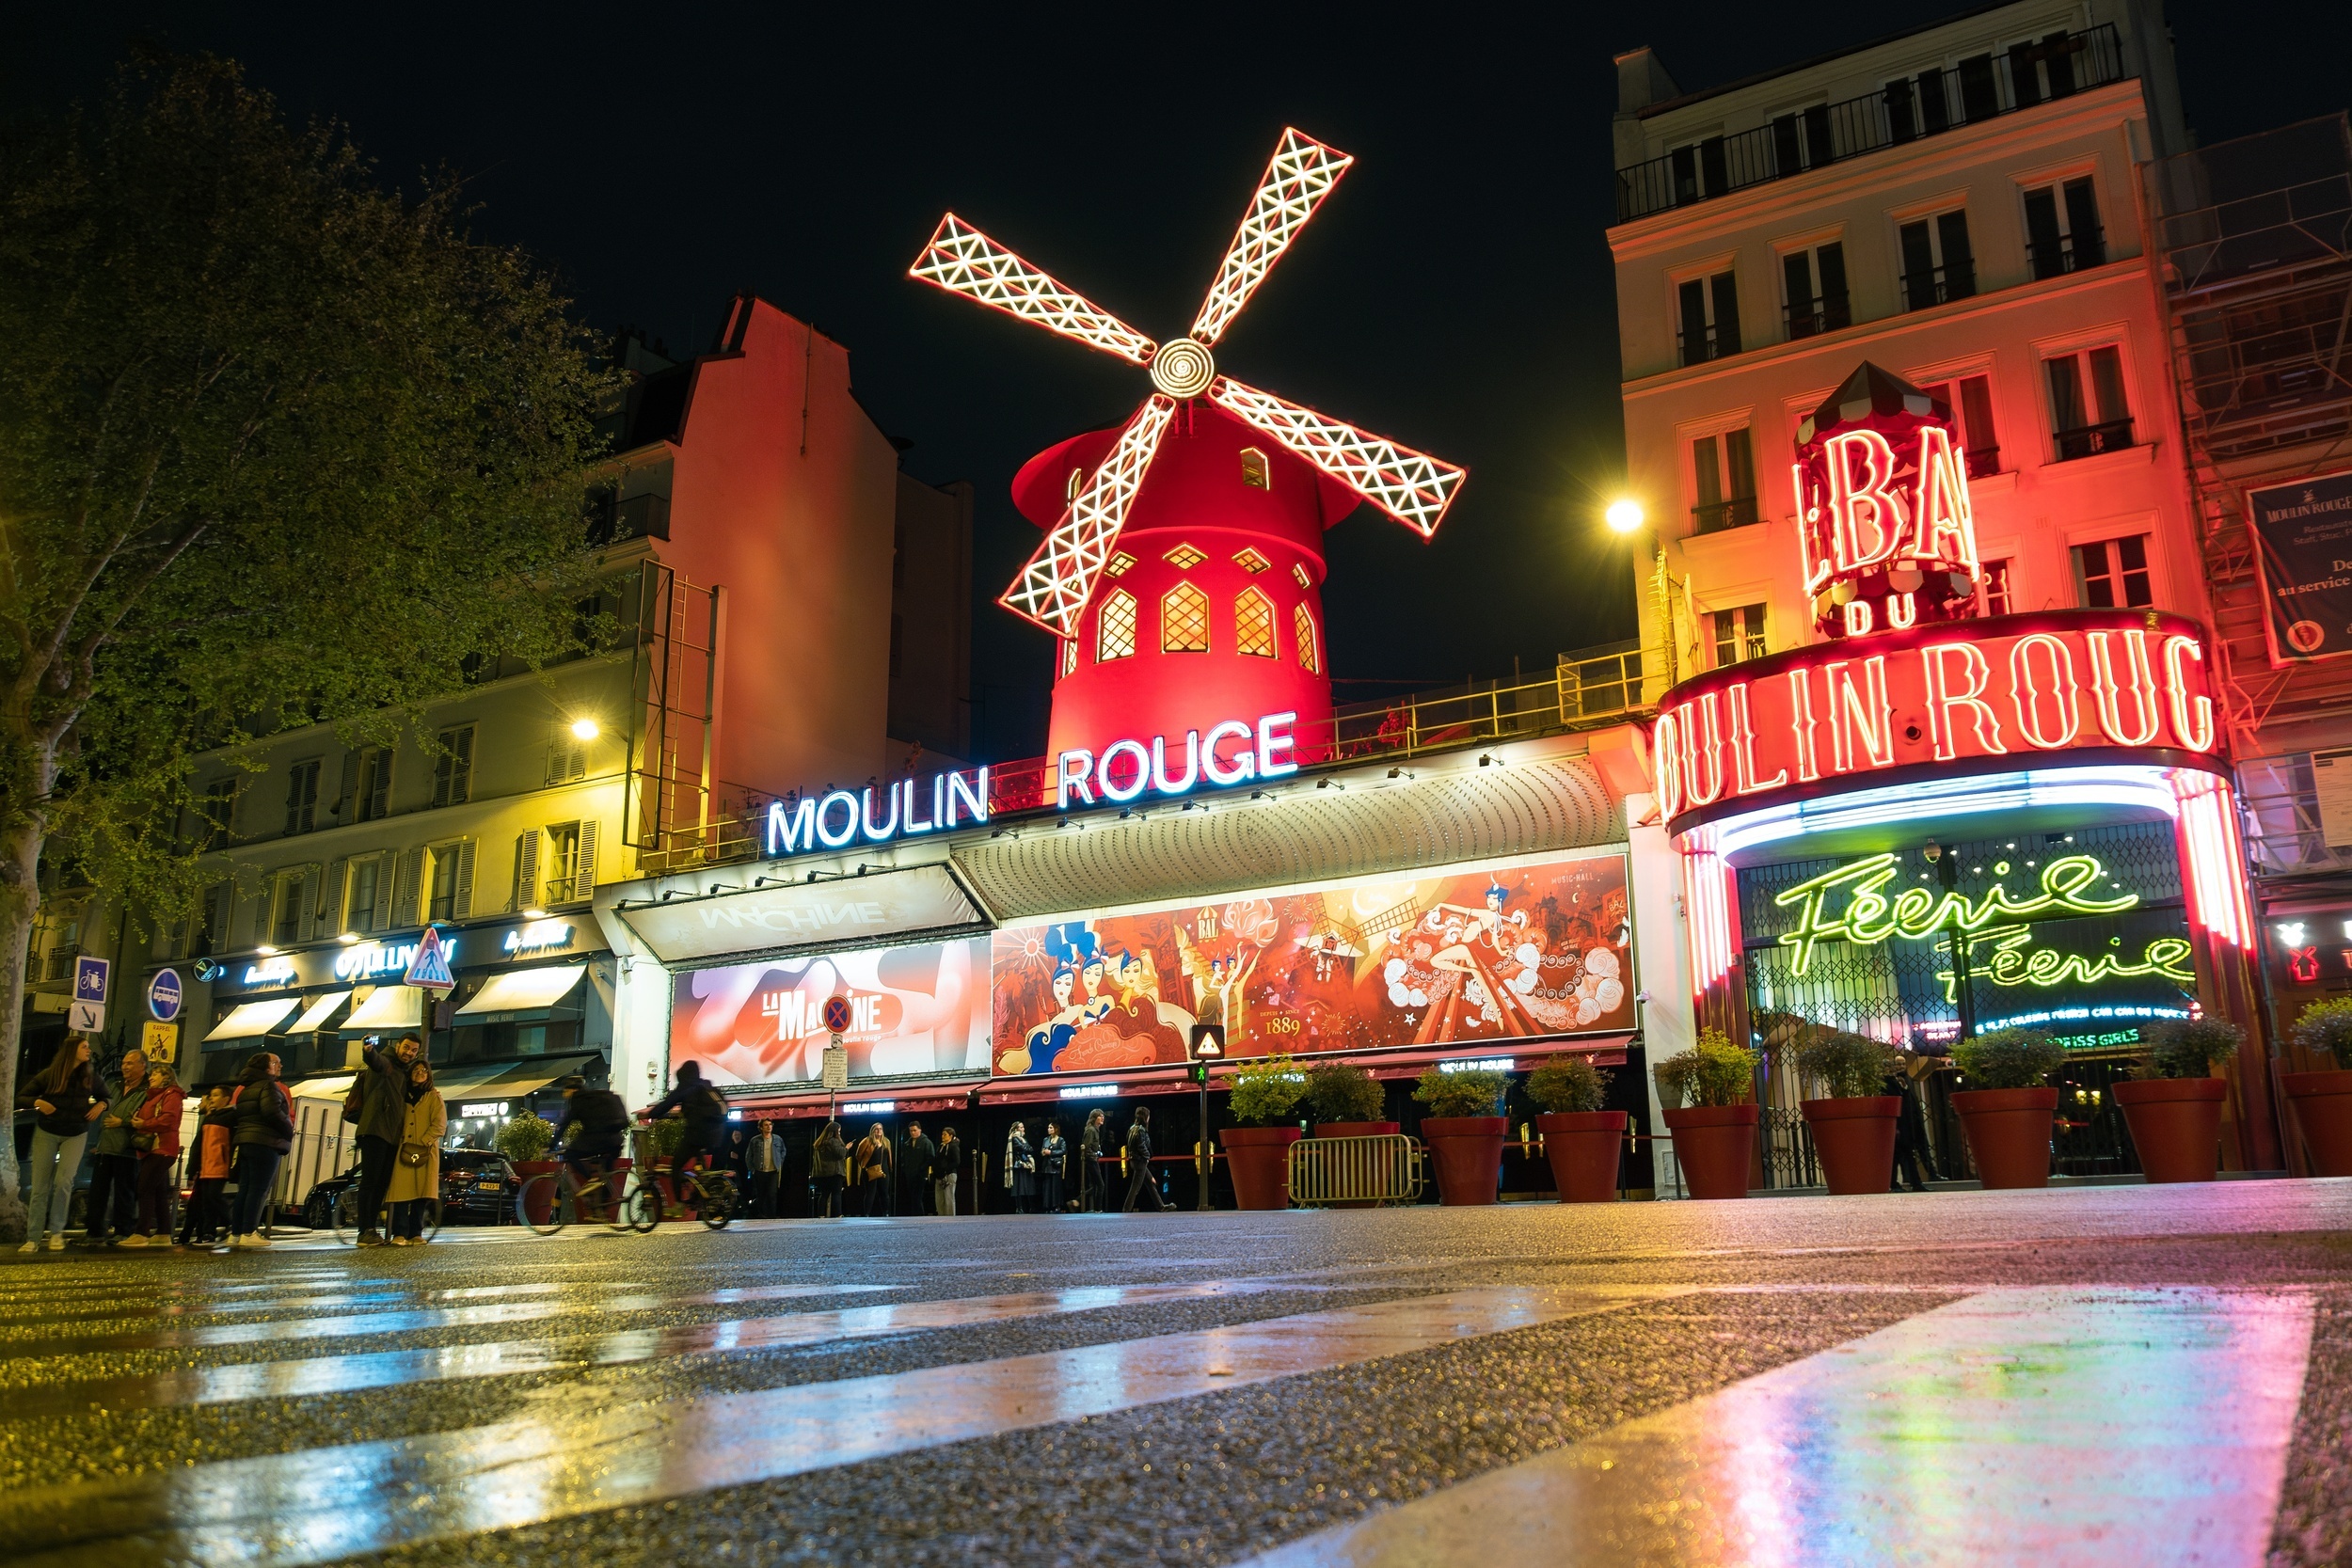 <p>“Moulin Rouge” translates to red mill, for the windmill that adorns this famous cabaret in the 18th arrondissement. Located in the 18th arrondissement, it’s the perfect place for an evening out. Even better, combine it with the rest of the area and head over after enjoying sunset at the Sacre-Coeur.</p><p><a href='https://www.msn.com/en-us/community/channel/vid-cj9pqbr0vn9in2b6ddcd8sfgpfq6x6utp44fssrv6mc2gtybw0us'>Follow us on MSN to see more of our exclusive lifestyle content.</a></p>